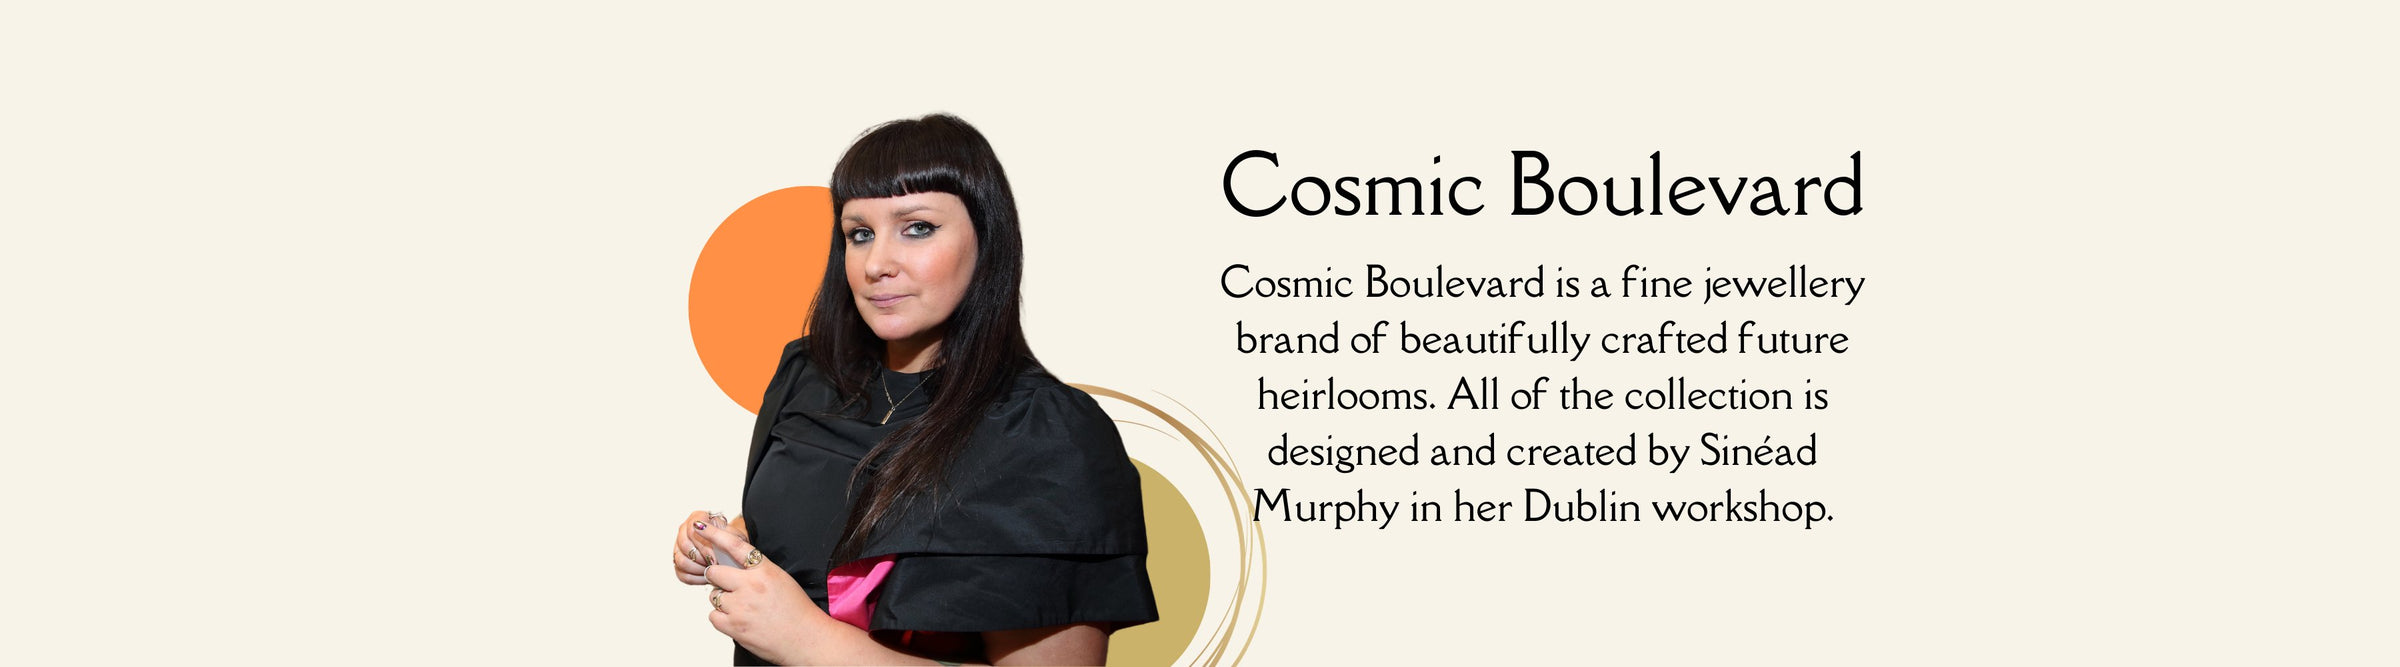 Cosmic Boulevard is a fine jewellery brand of beautifully crafted future heirlooms. All of the collection is designed and created by Sinéad Murphy in her Dublin workshop.